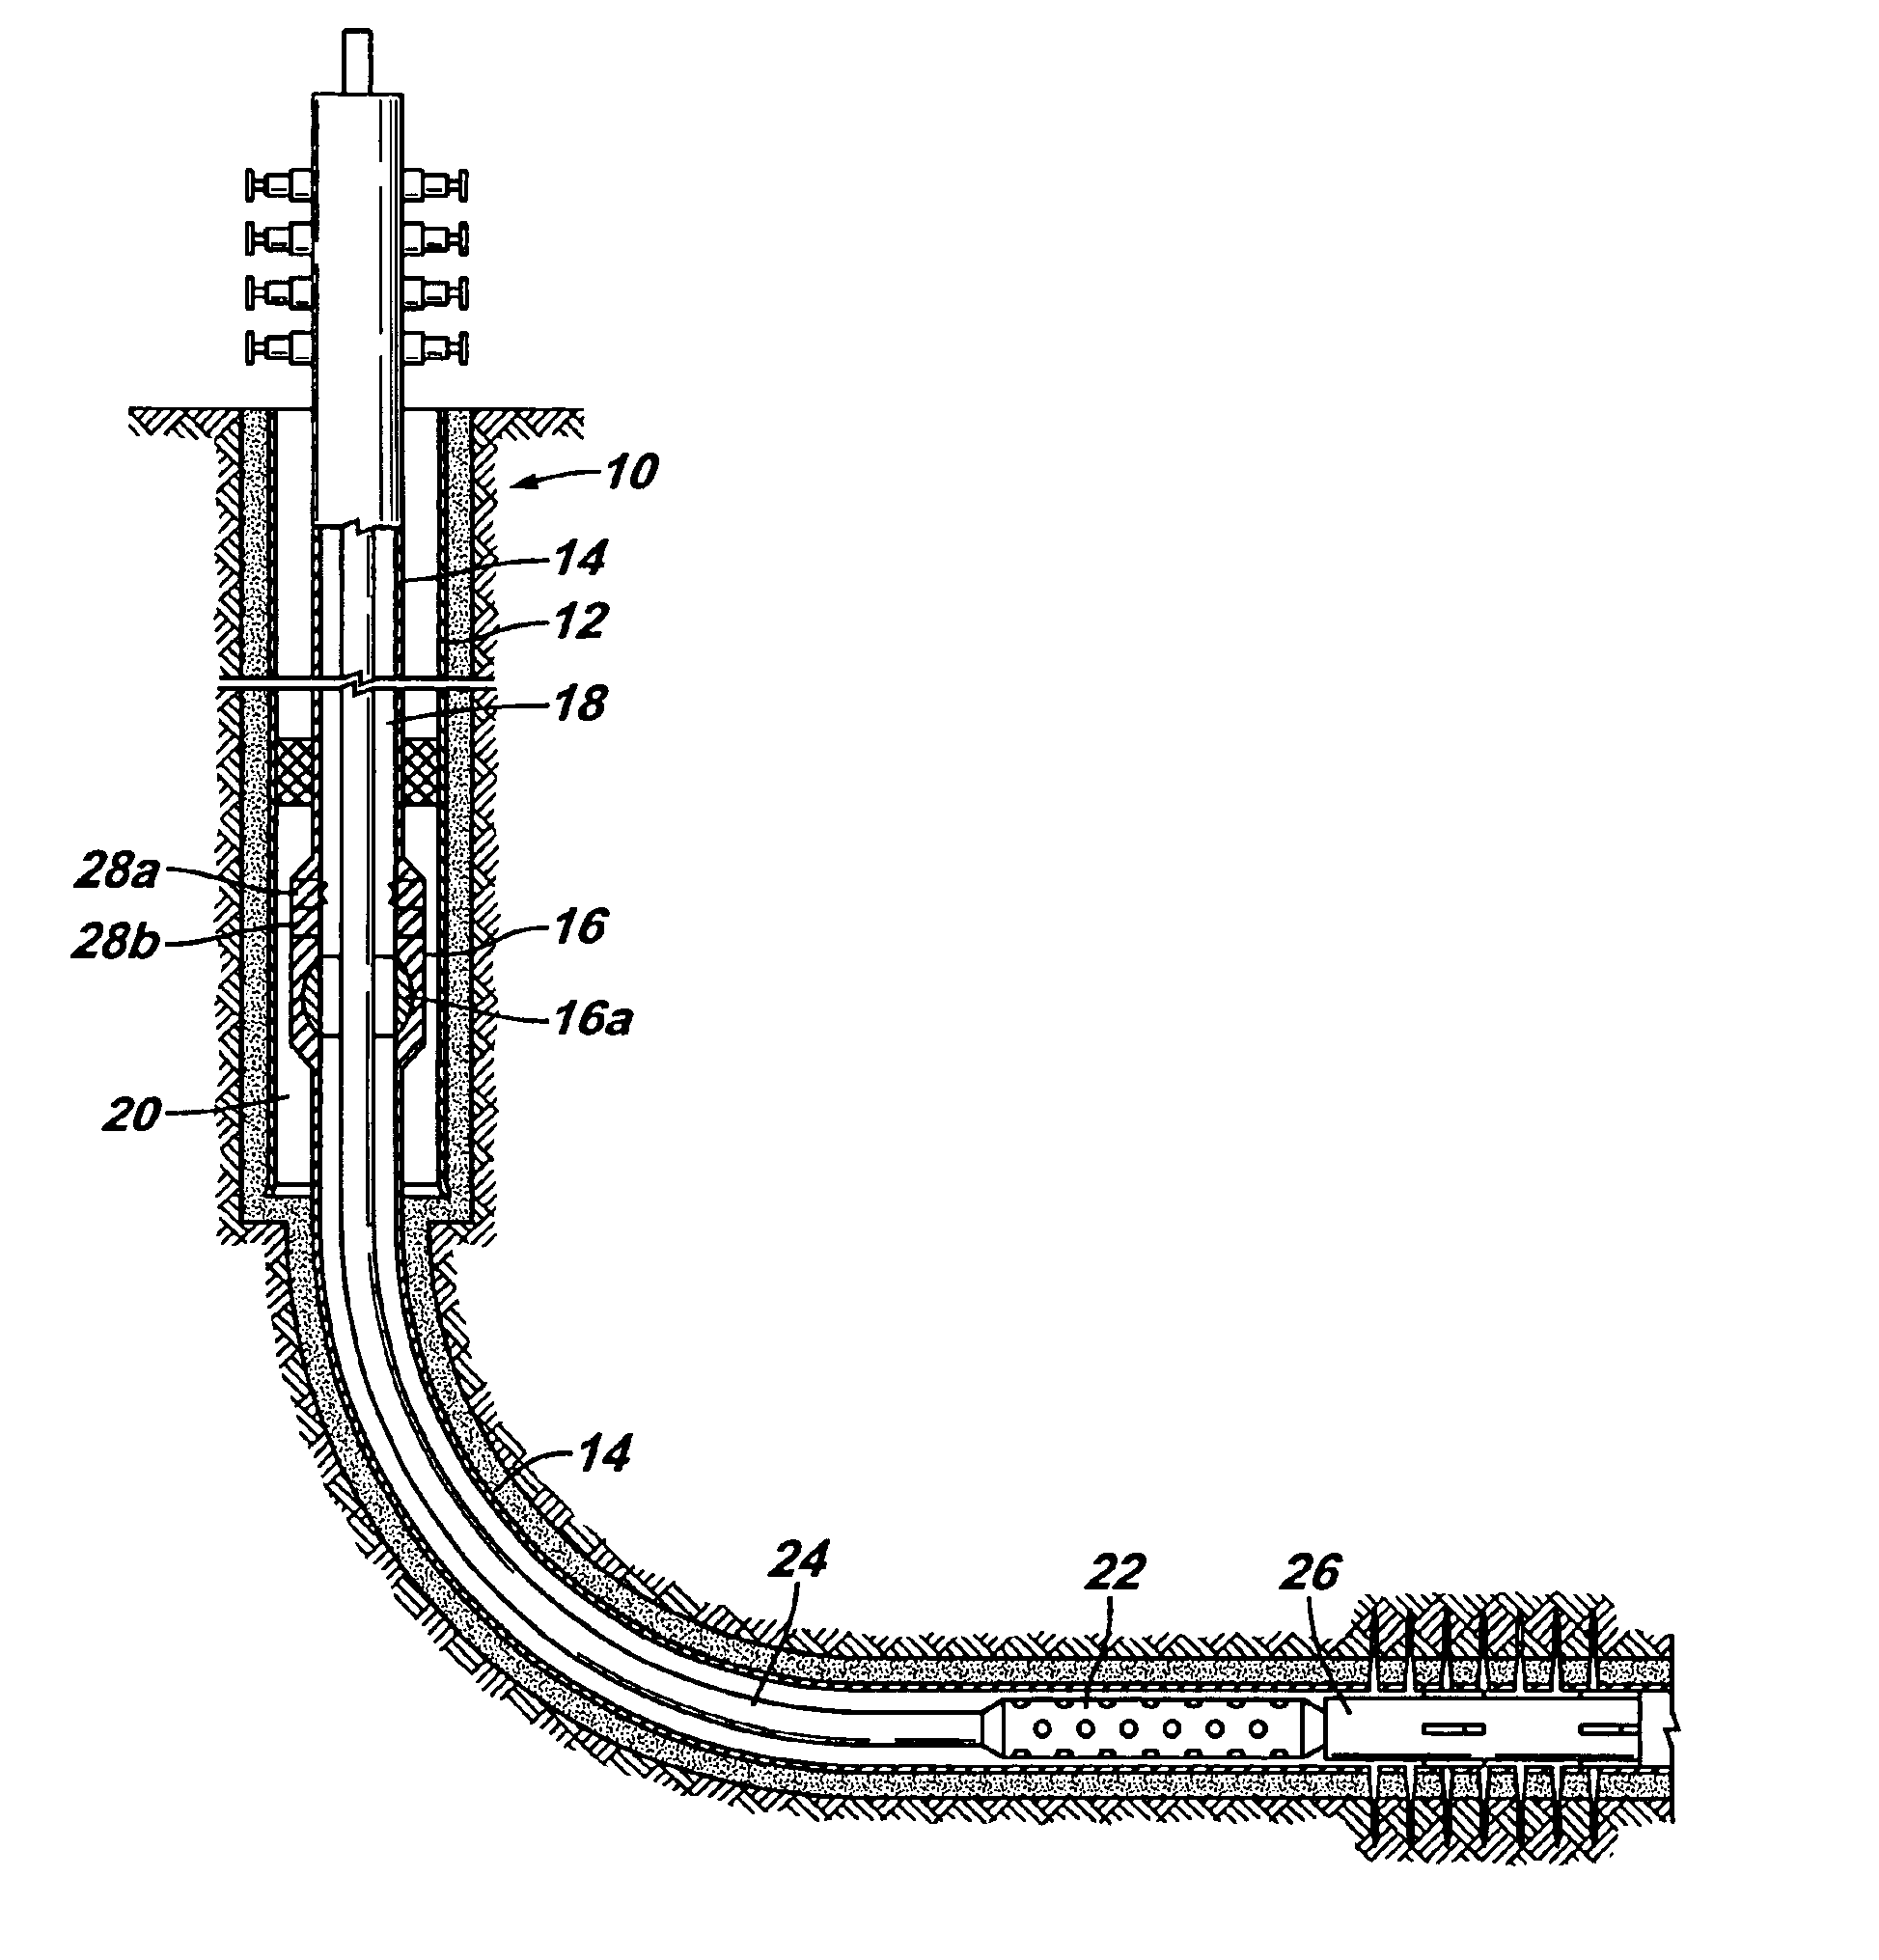 Multiple interventionless actuated downhole valve and method